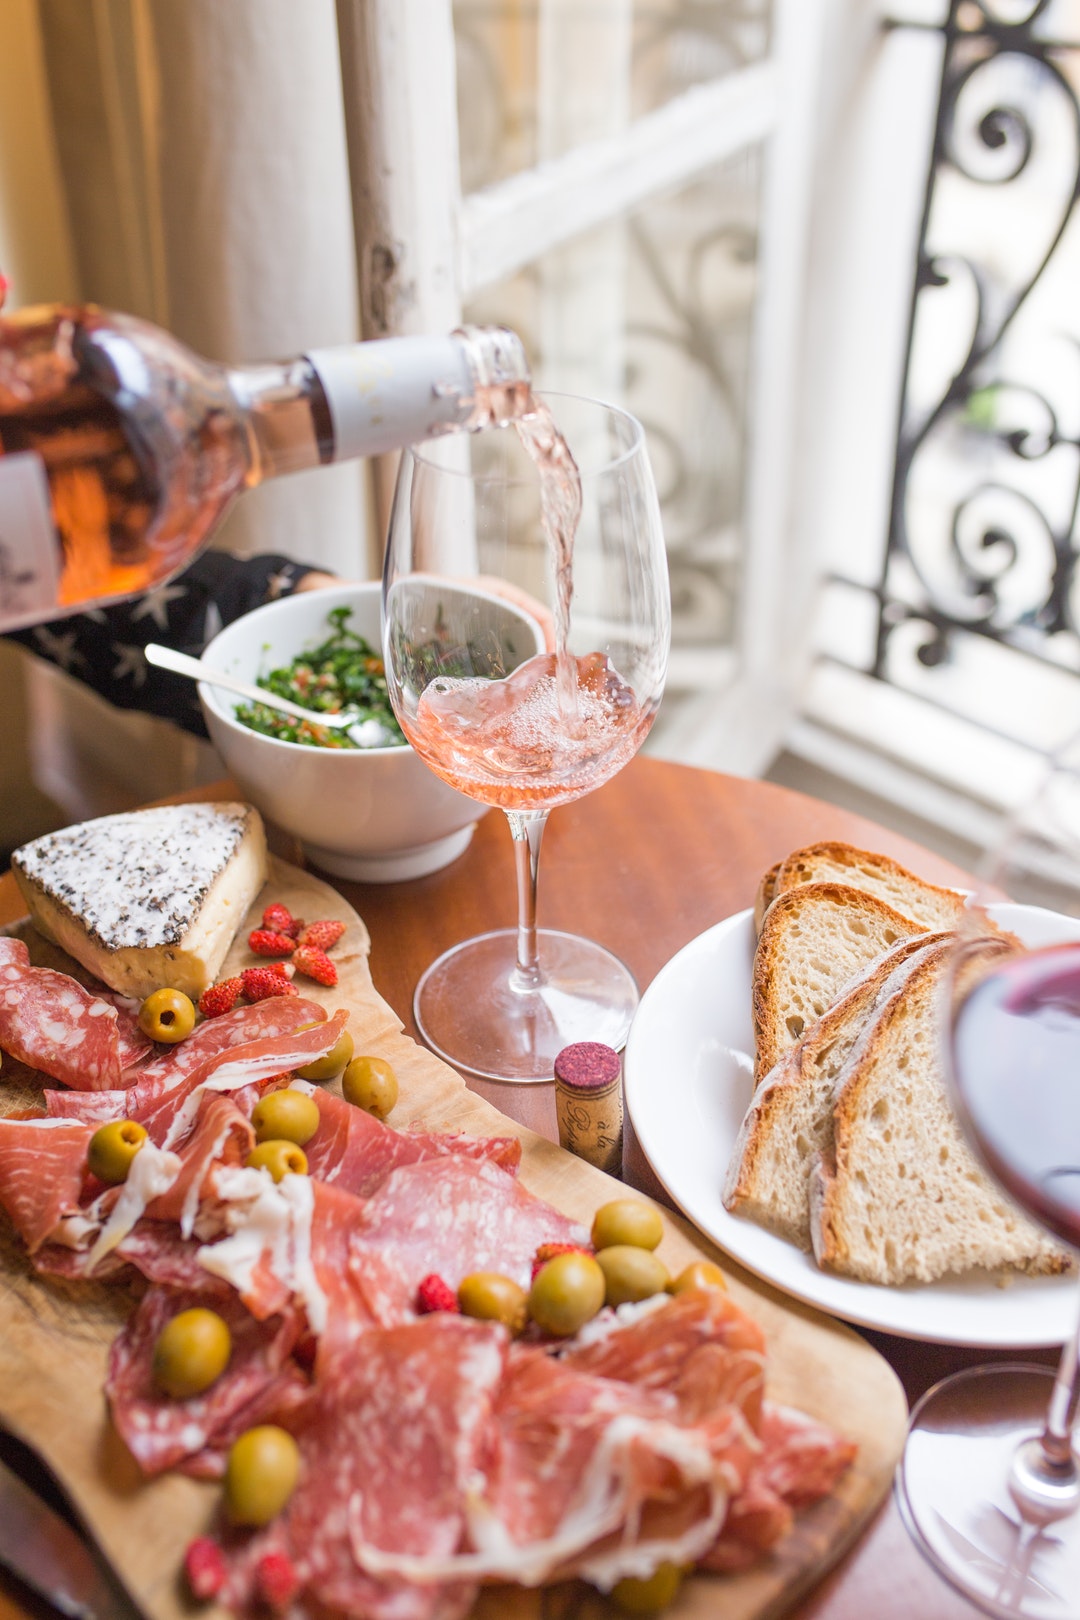 A person pouring rose into a wine glass, a cheese board with brie and salami, and bread on a table in Paris